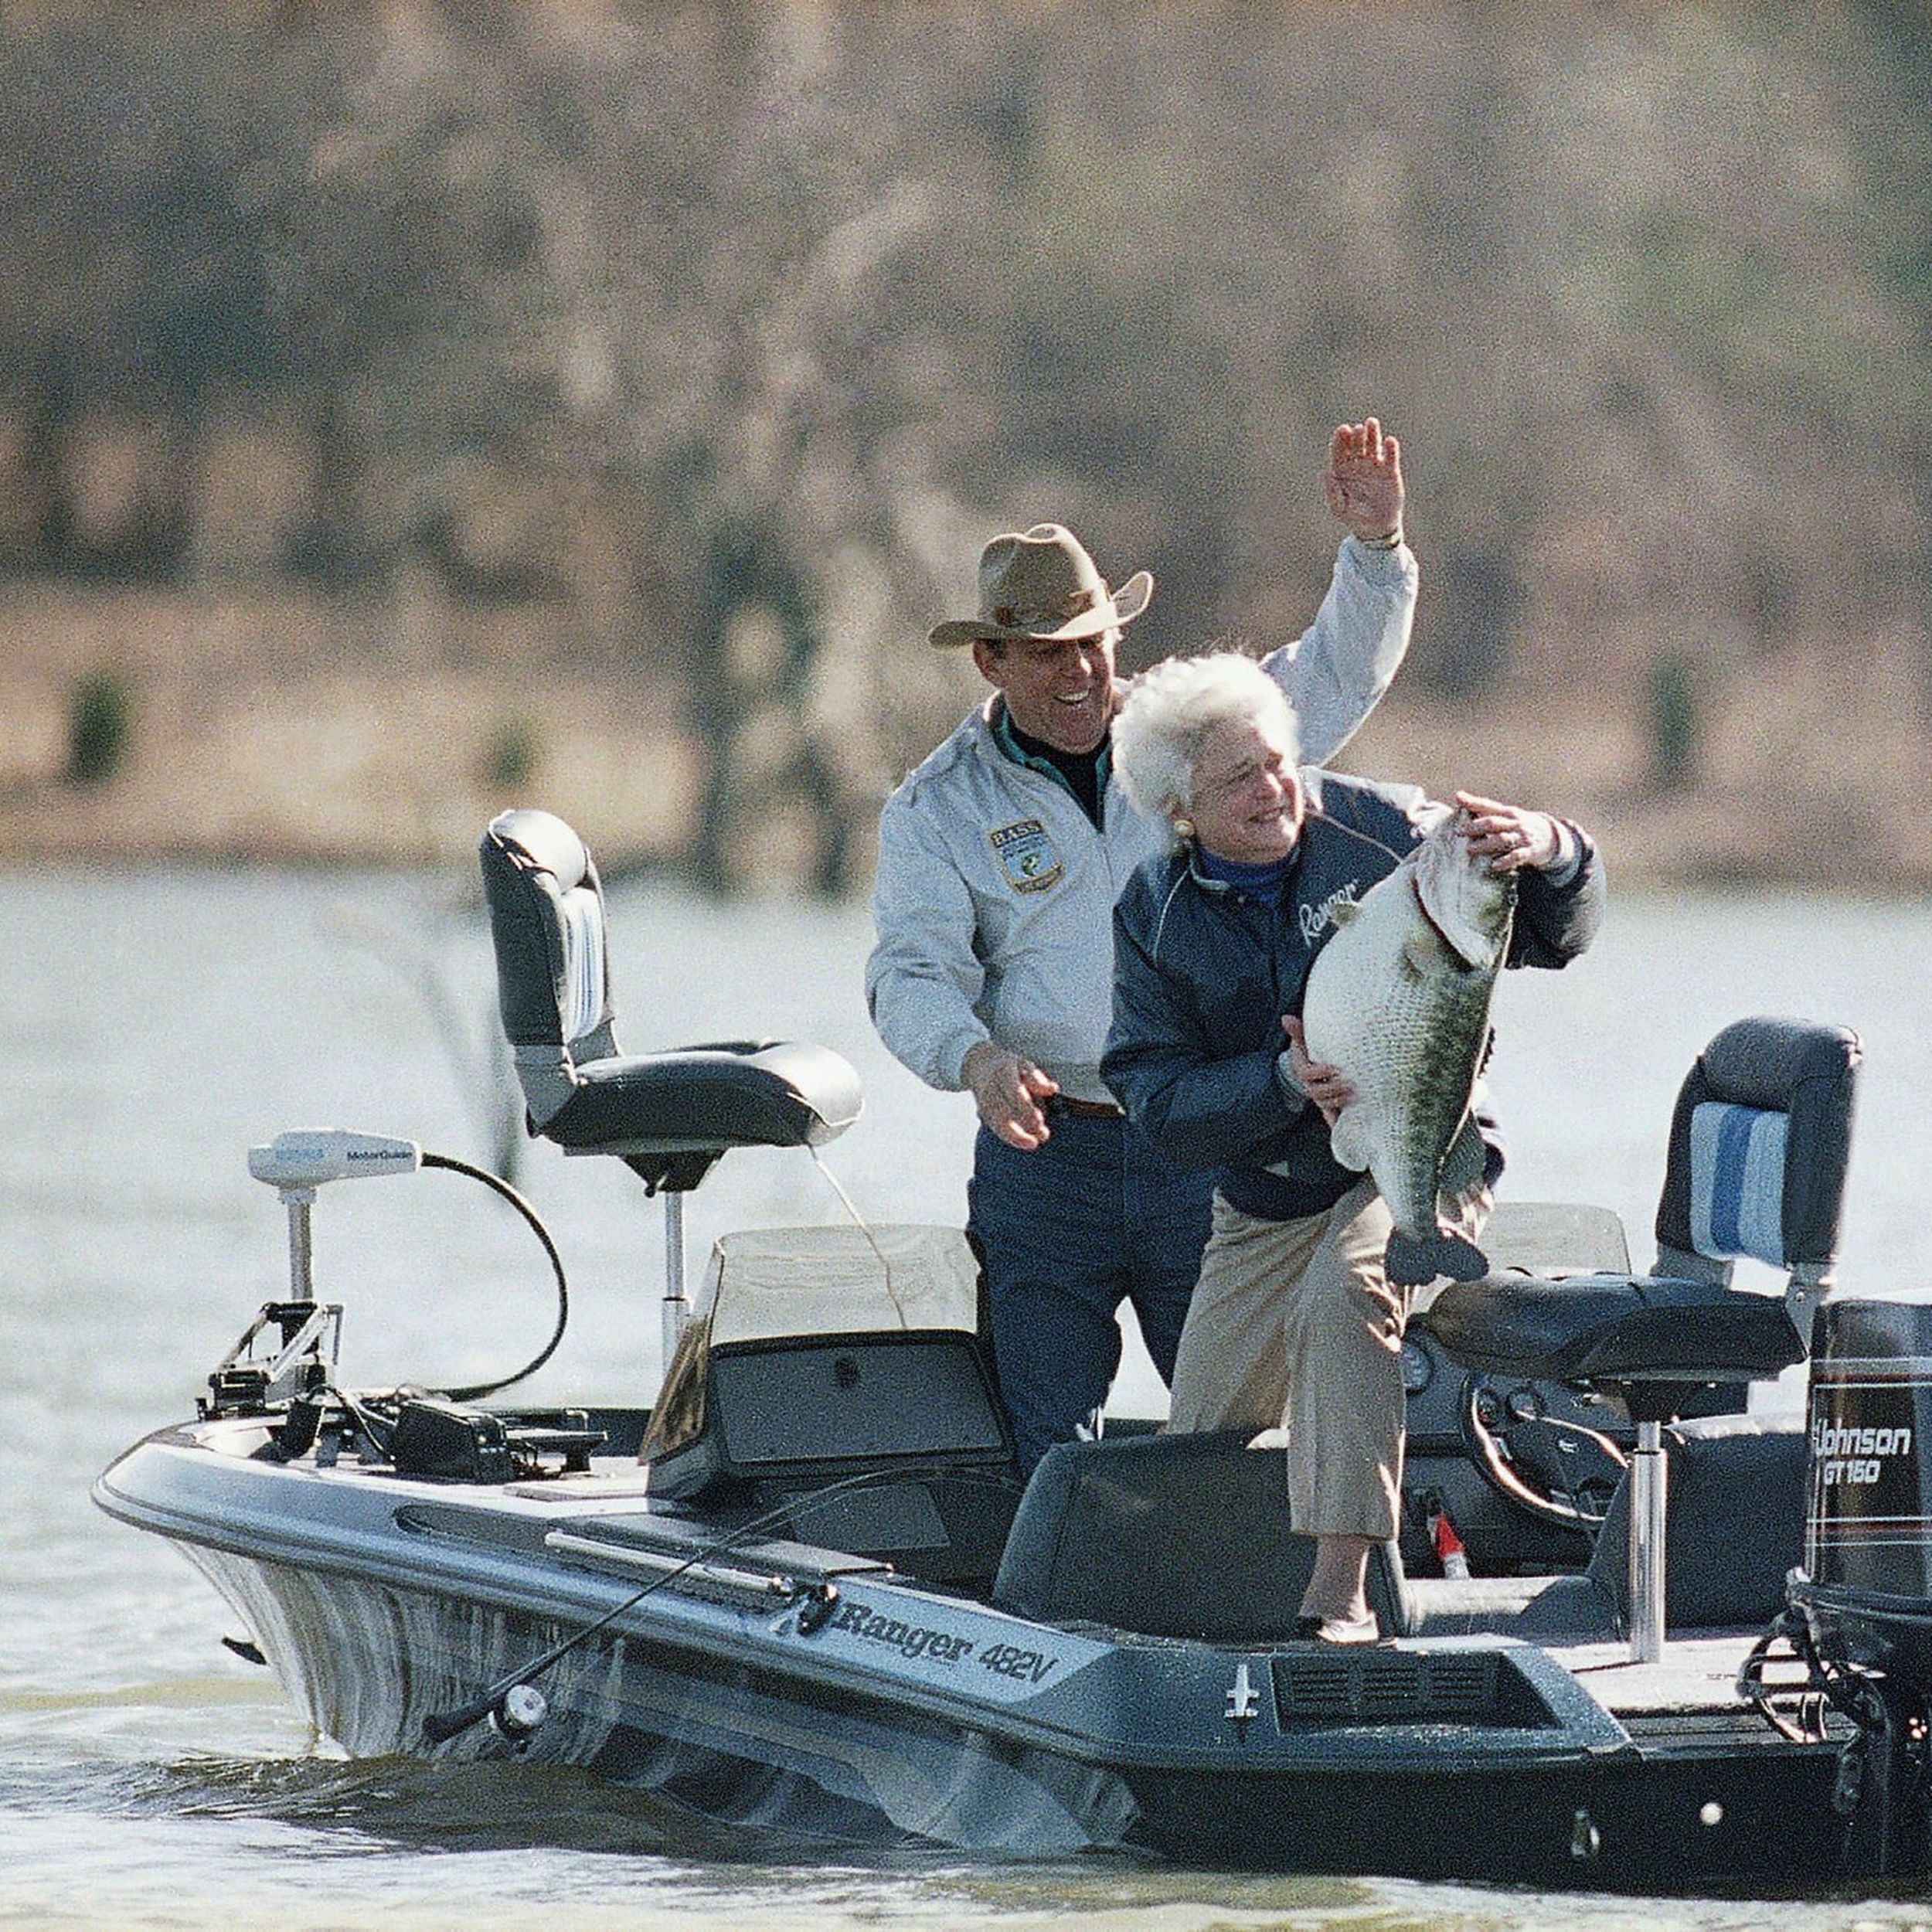 Ray Scott, 'ultimate showman' of bass fishing, dies at 88